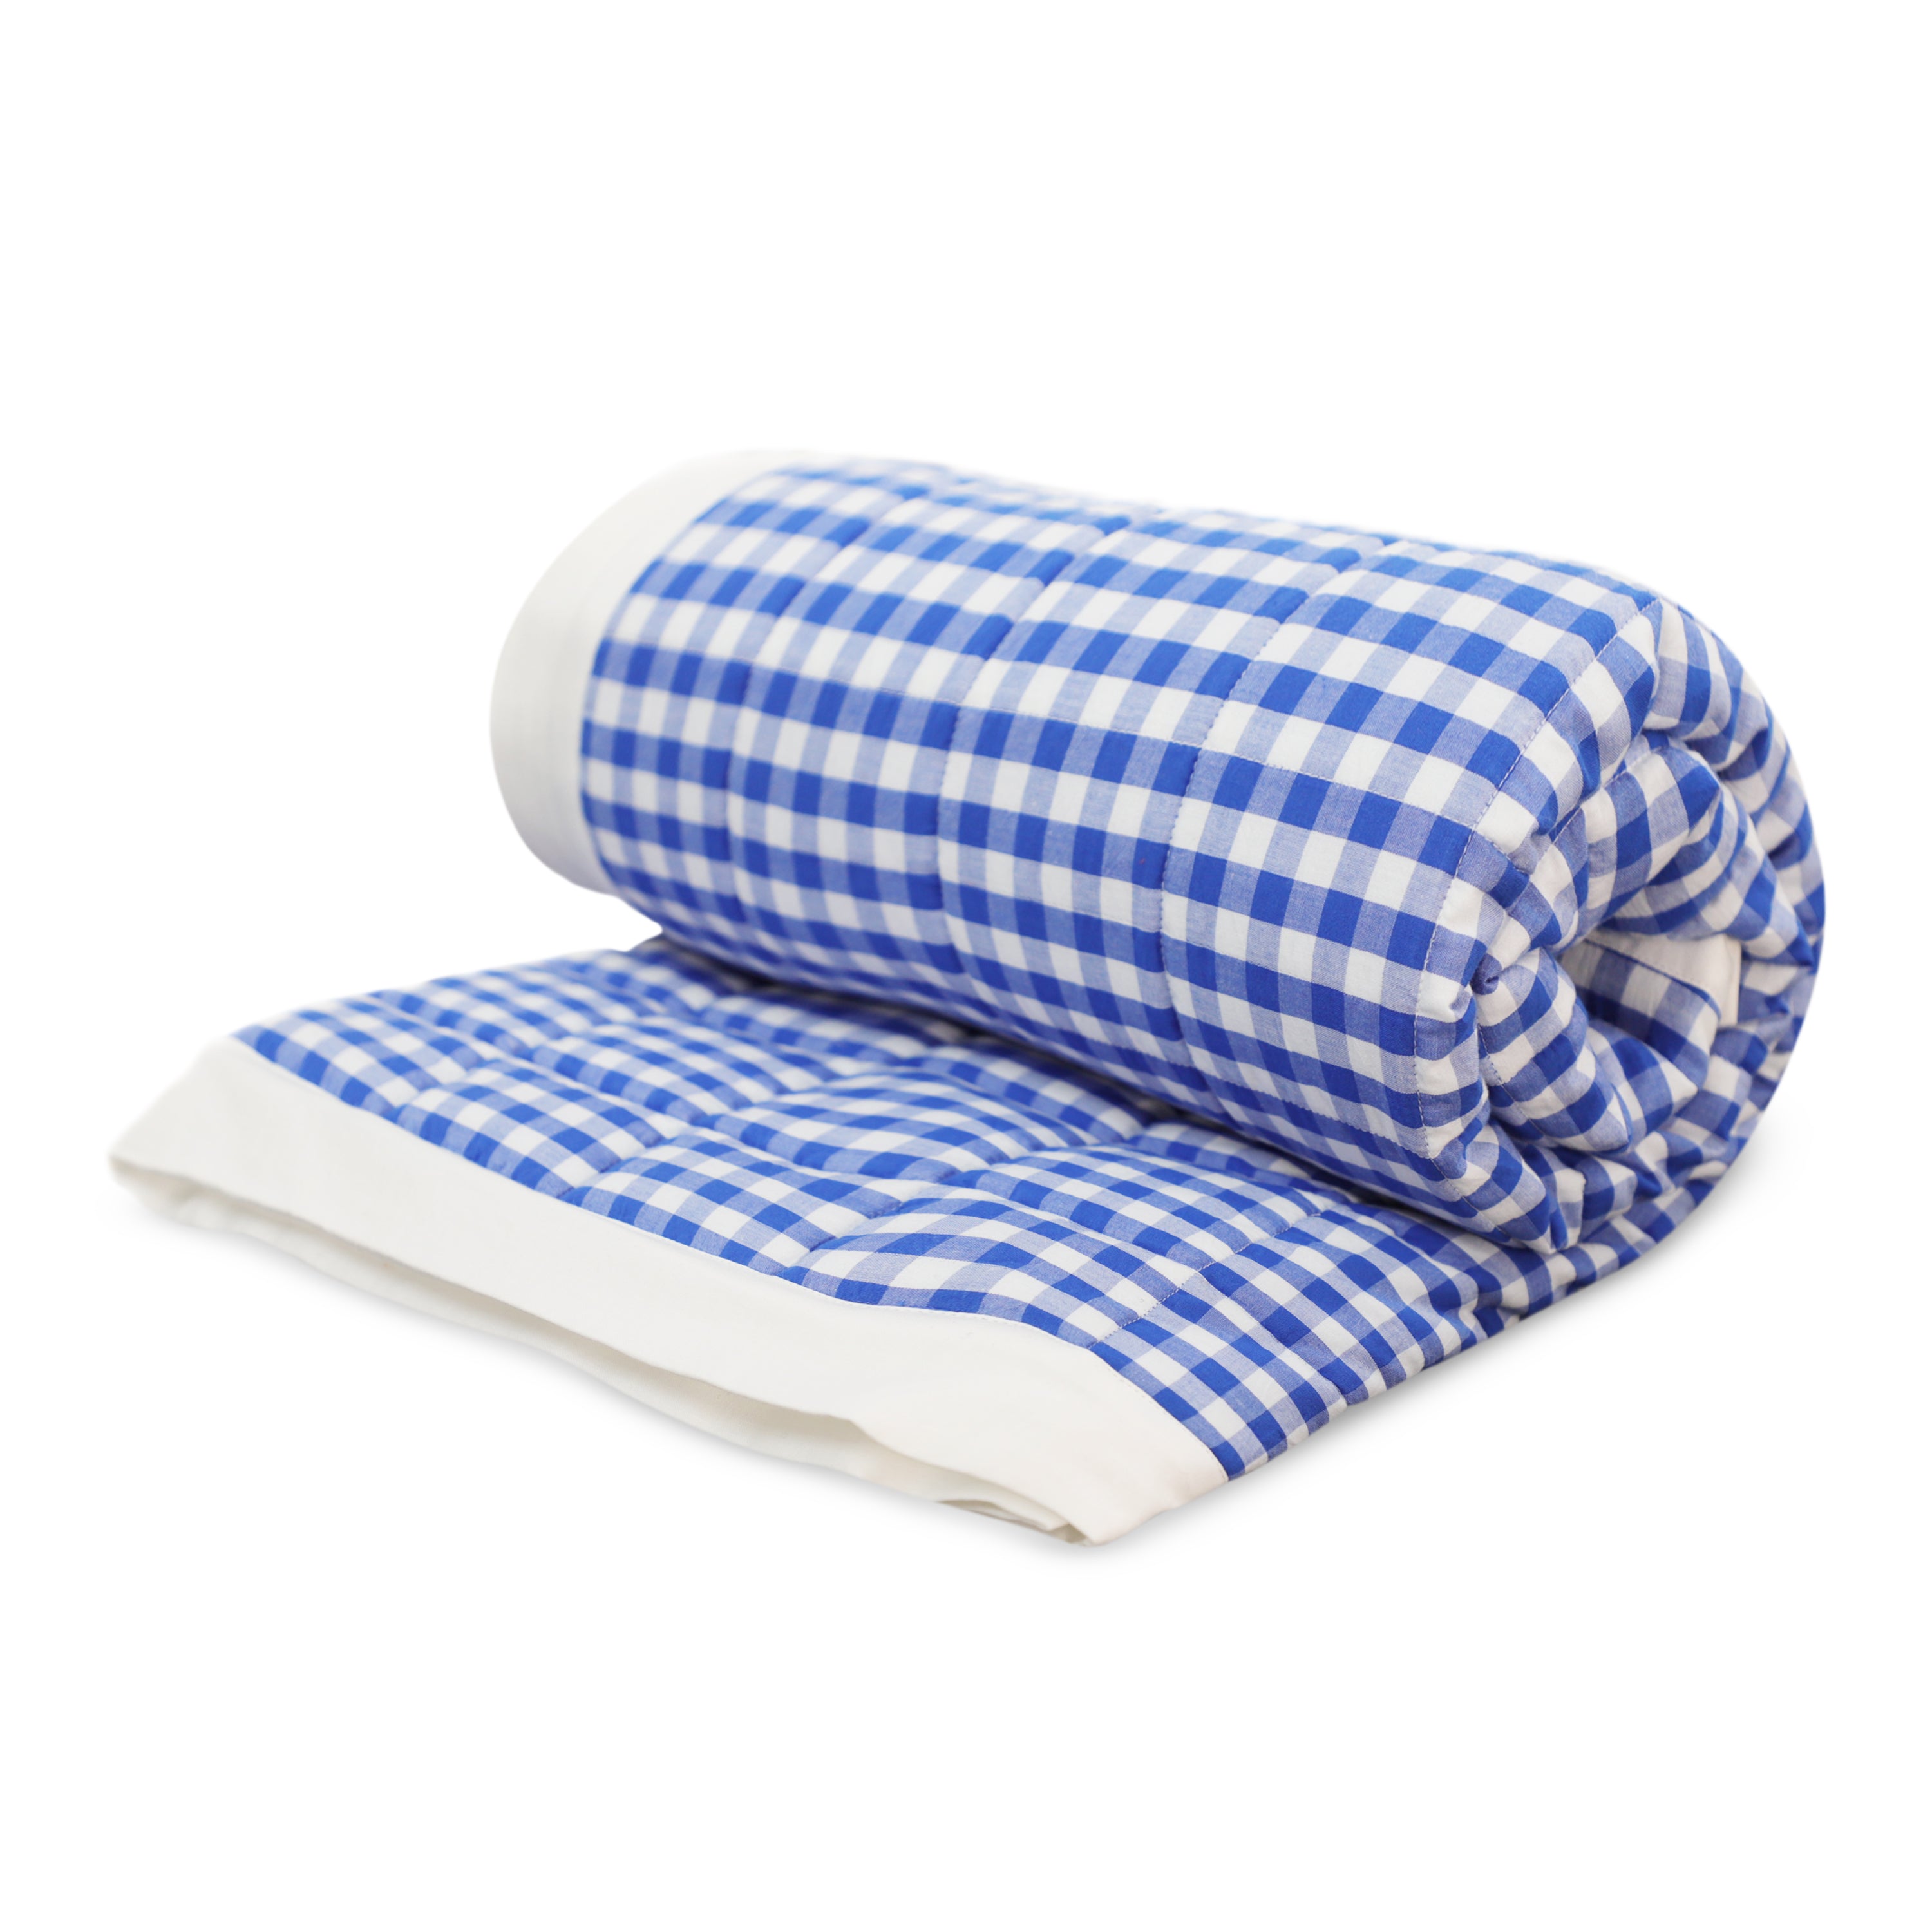 Blue Gingham Cotton Quilt and Shams